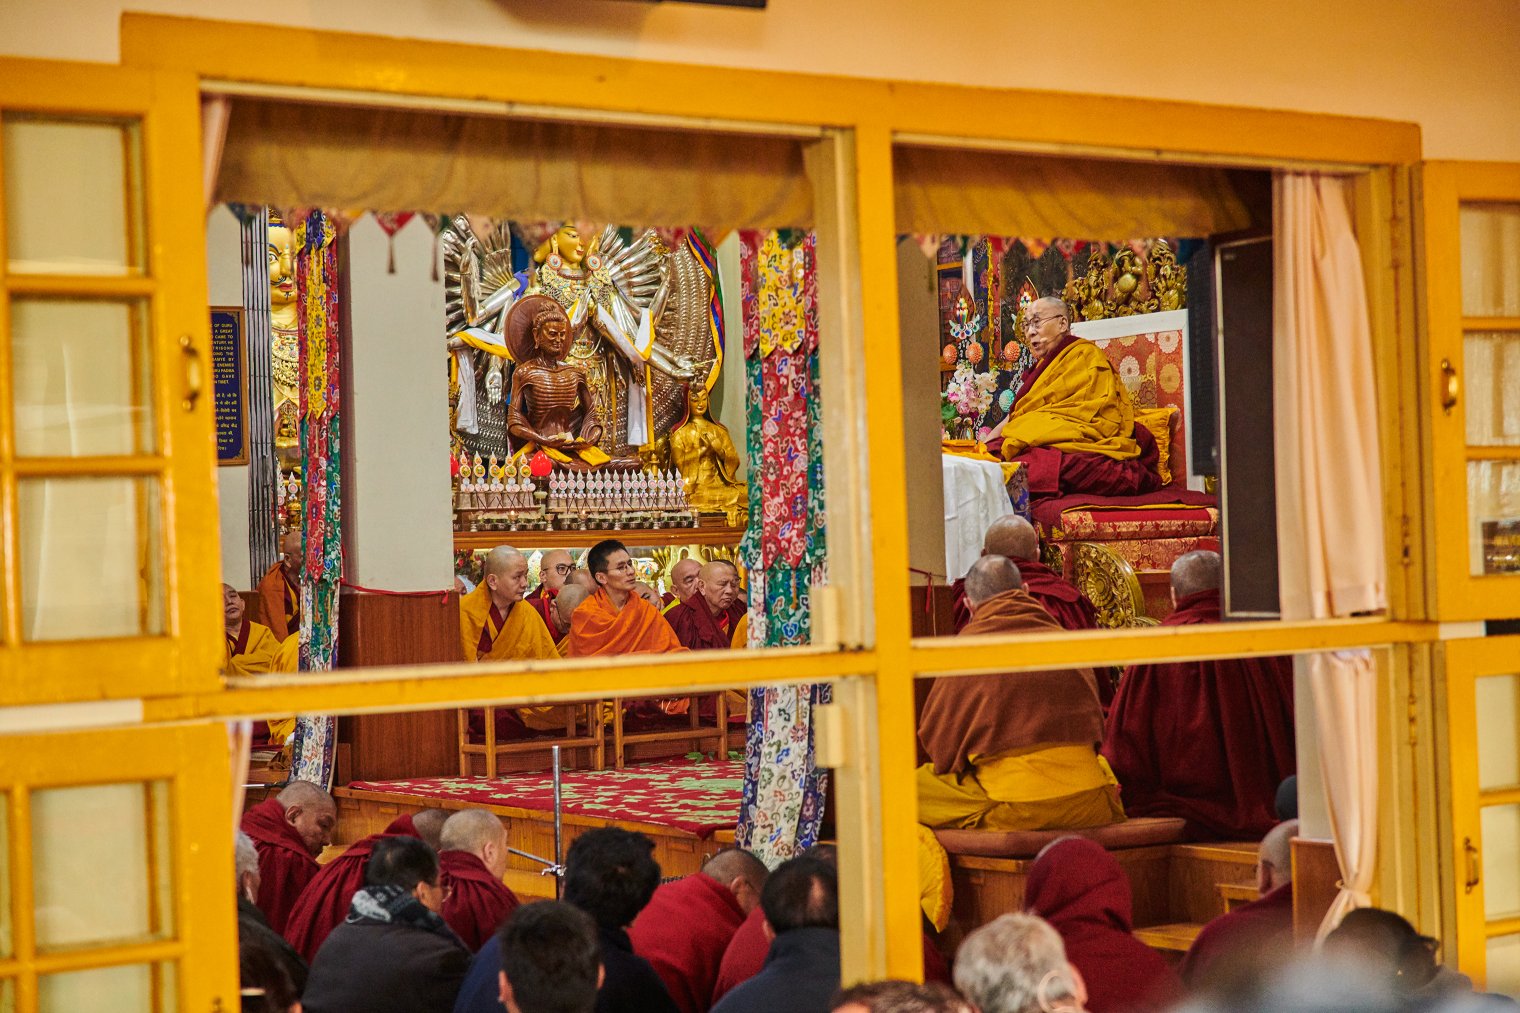 The Dalai Lama delivers a lecture from his throne on Feb. 18 to mark Losar, the Tibetan new year.